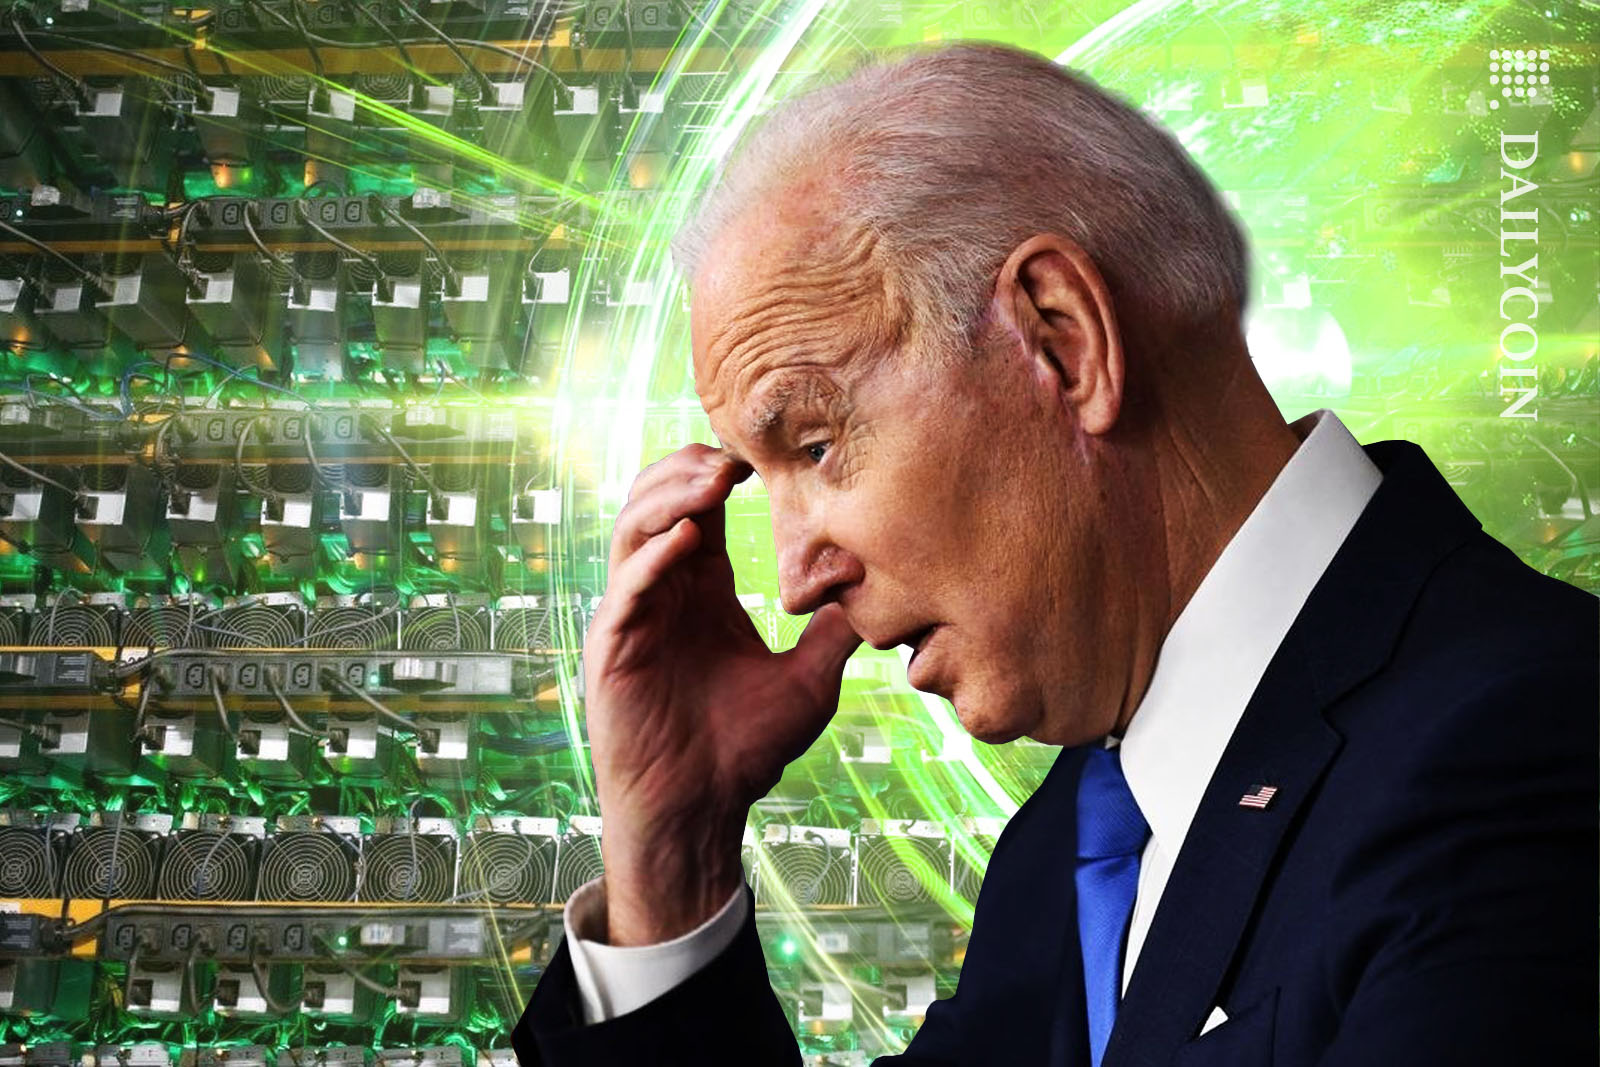 Joe Biden being upset and disappointed infront of a wall of Bitcoin miners.